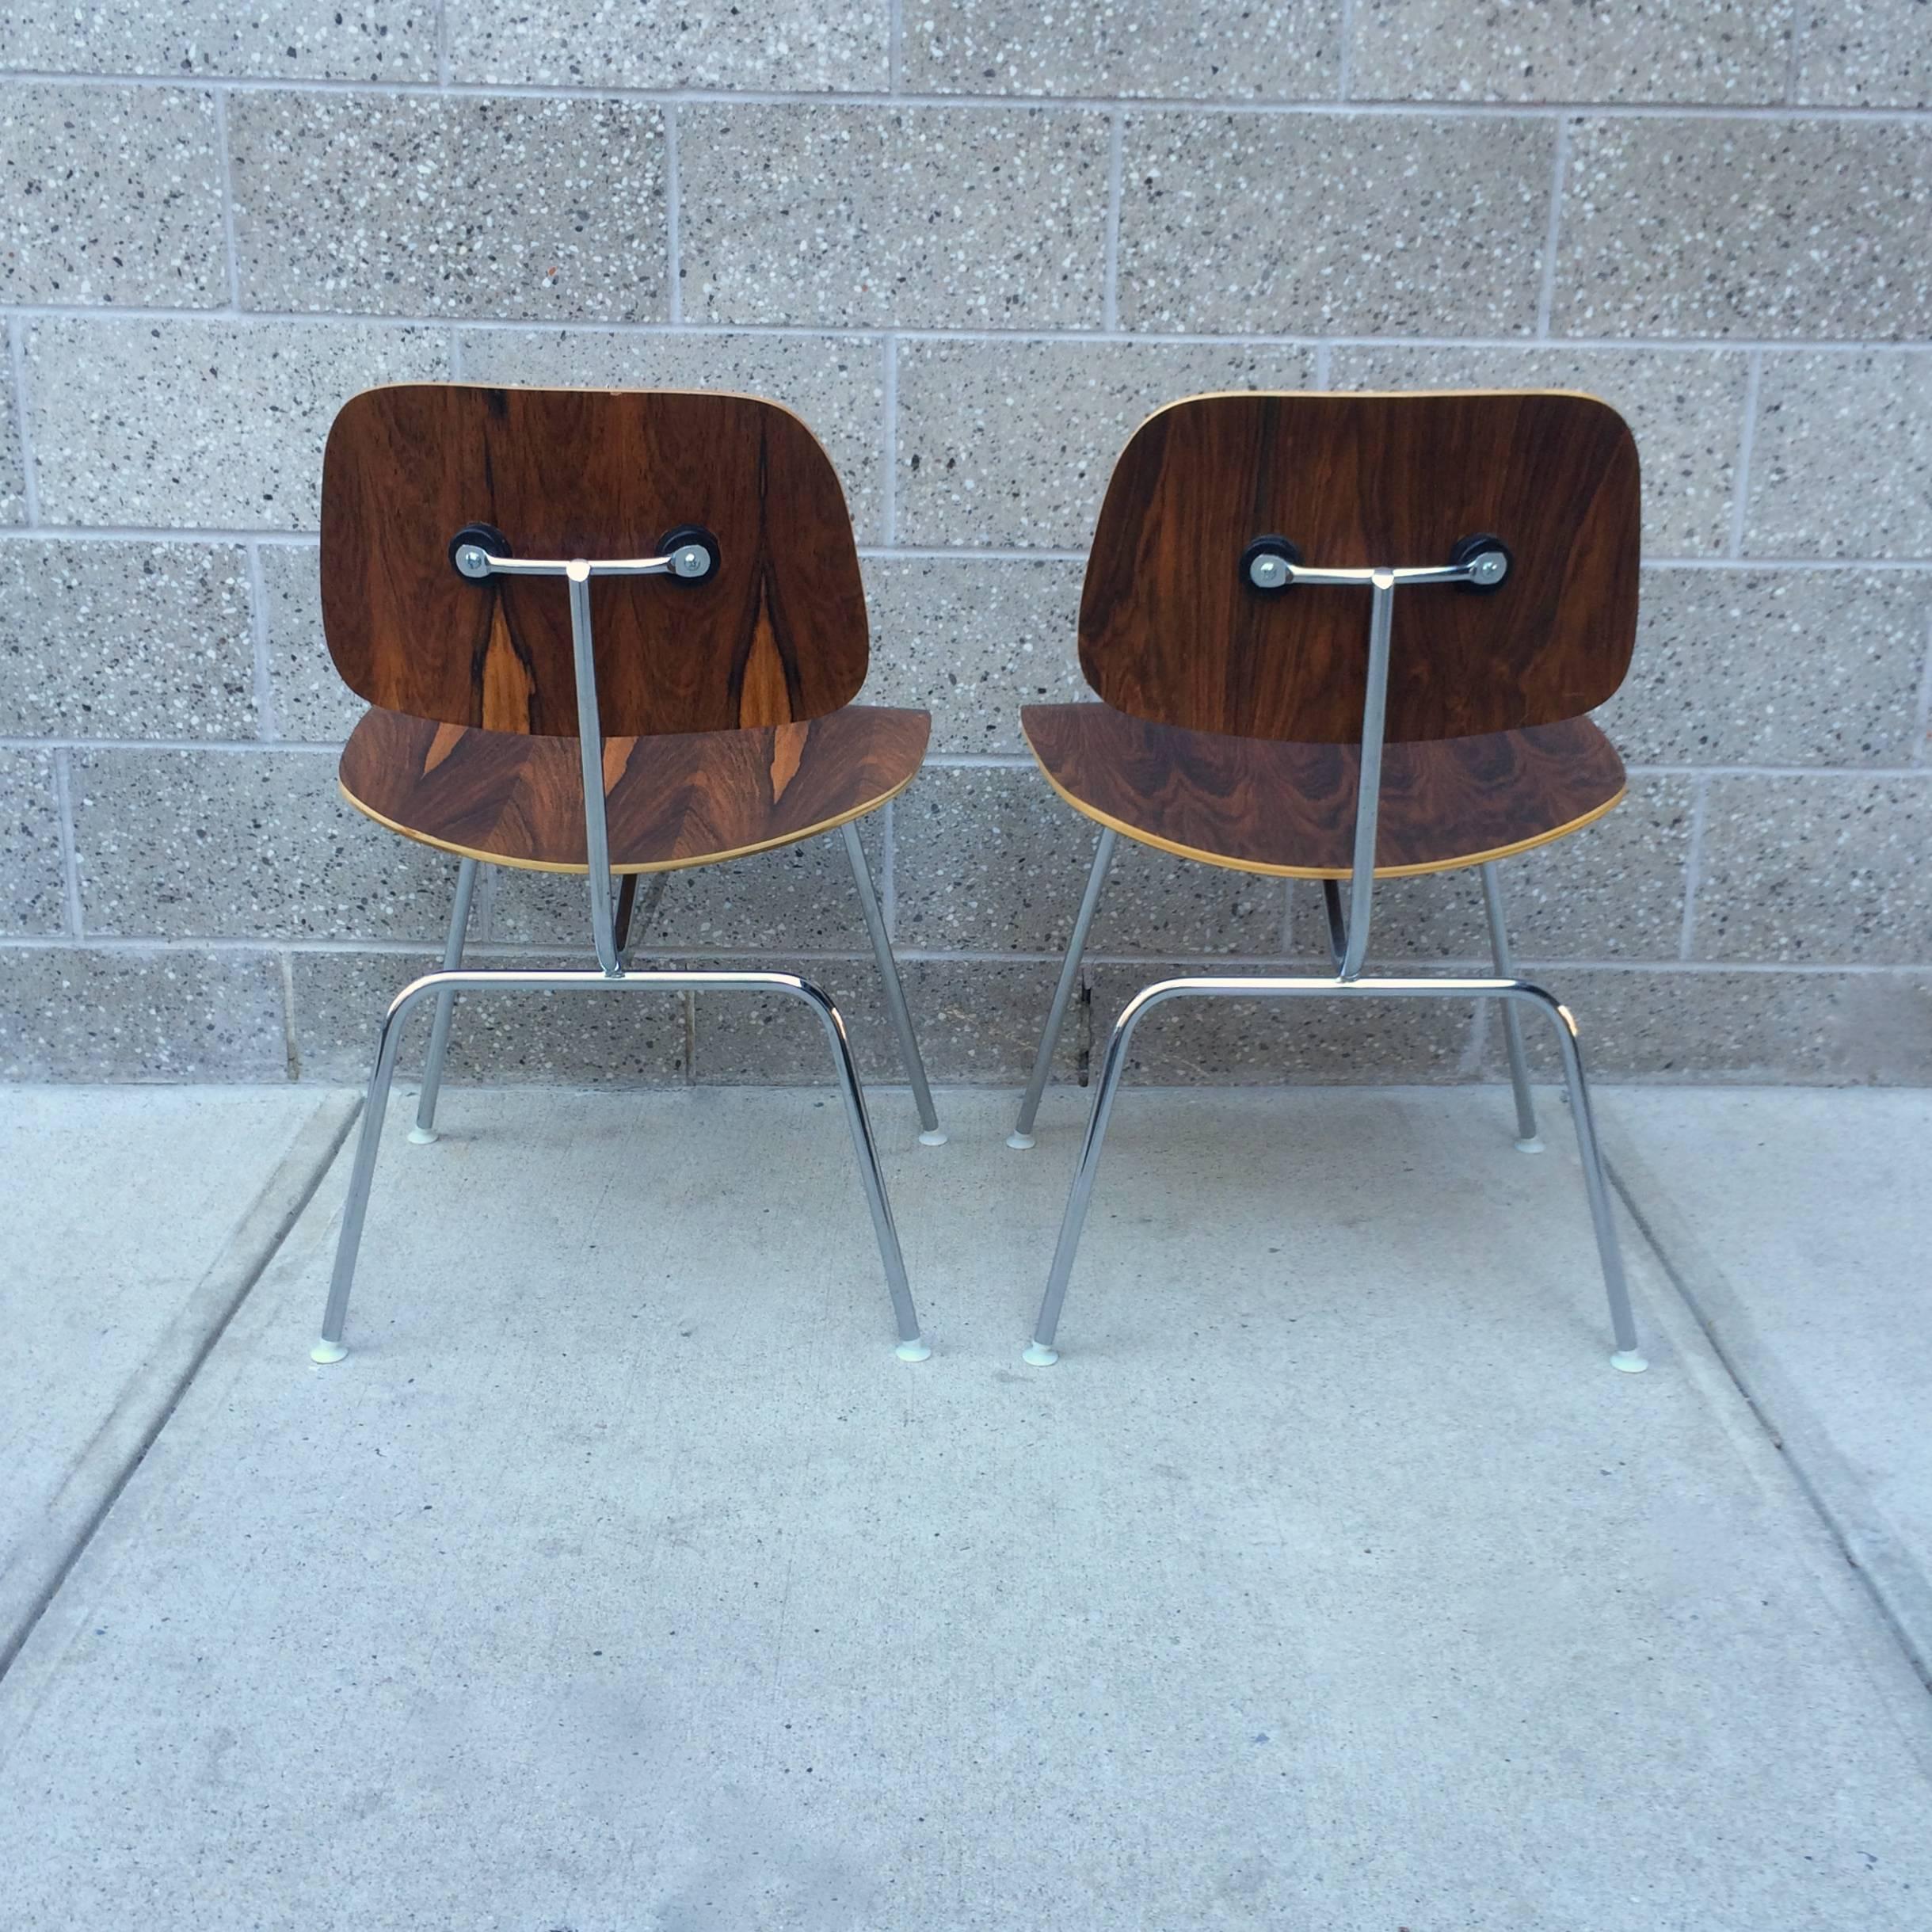 Nylon Pair of Eames Rosewood DCM Chairs for Herman Miller